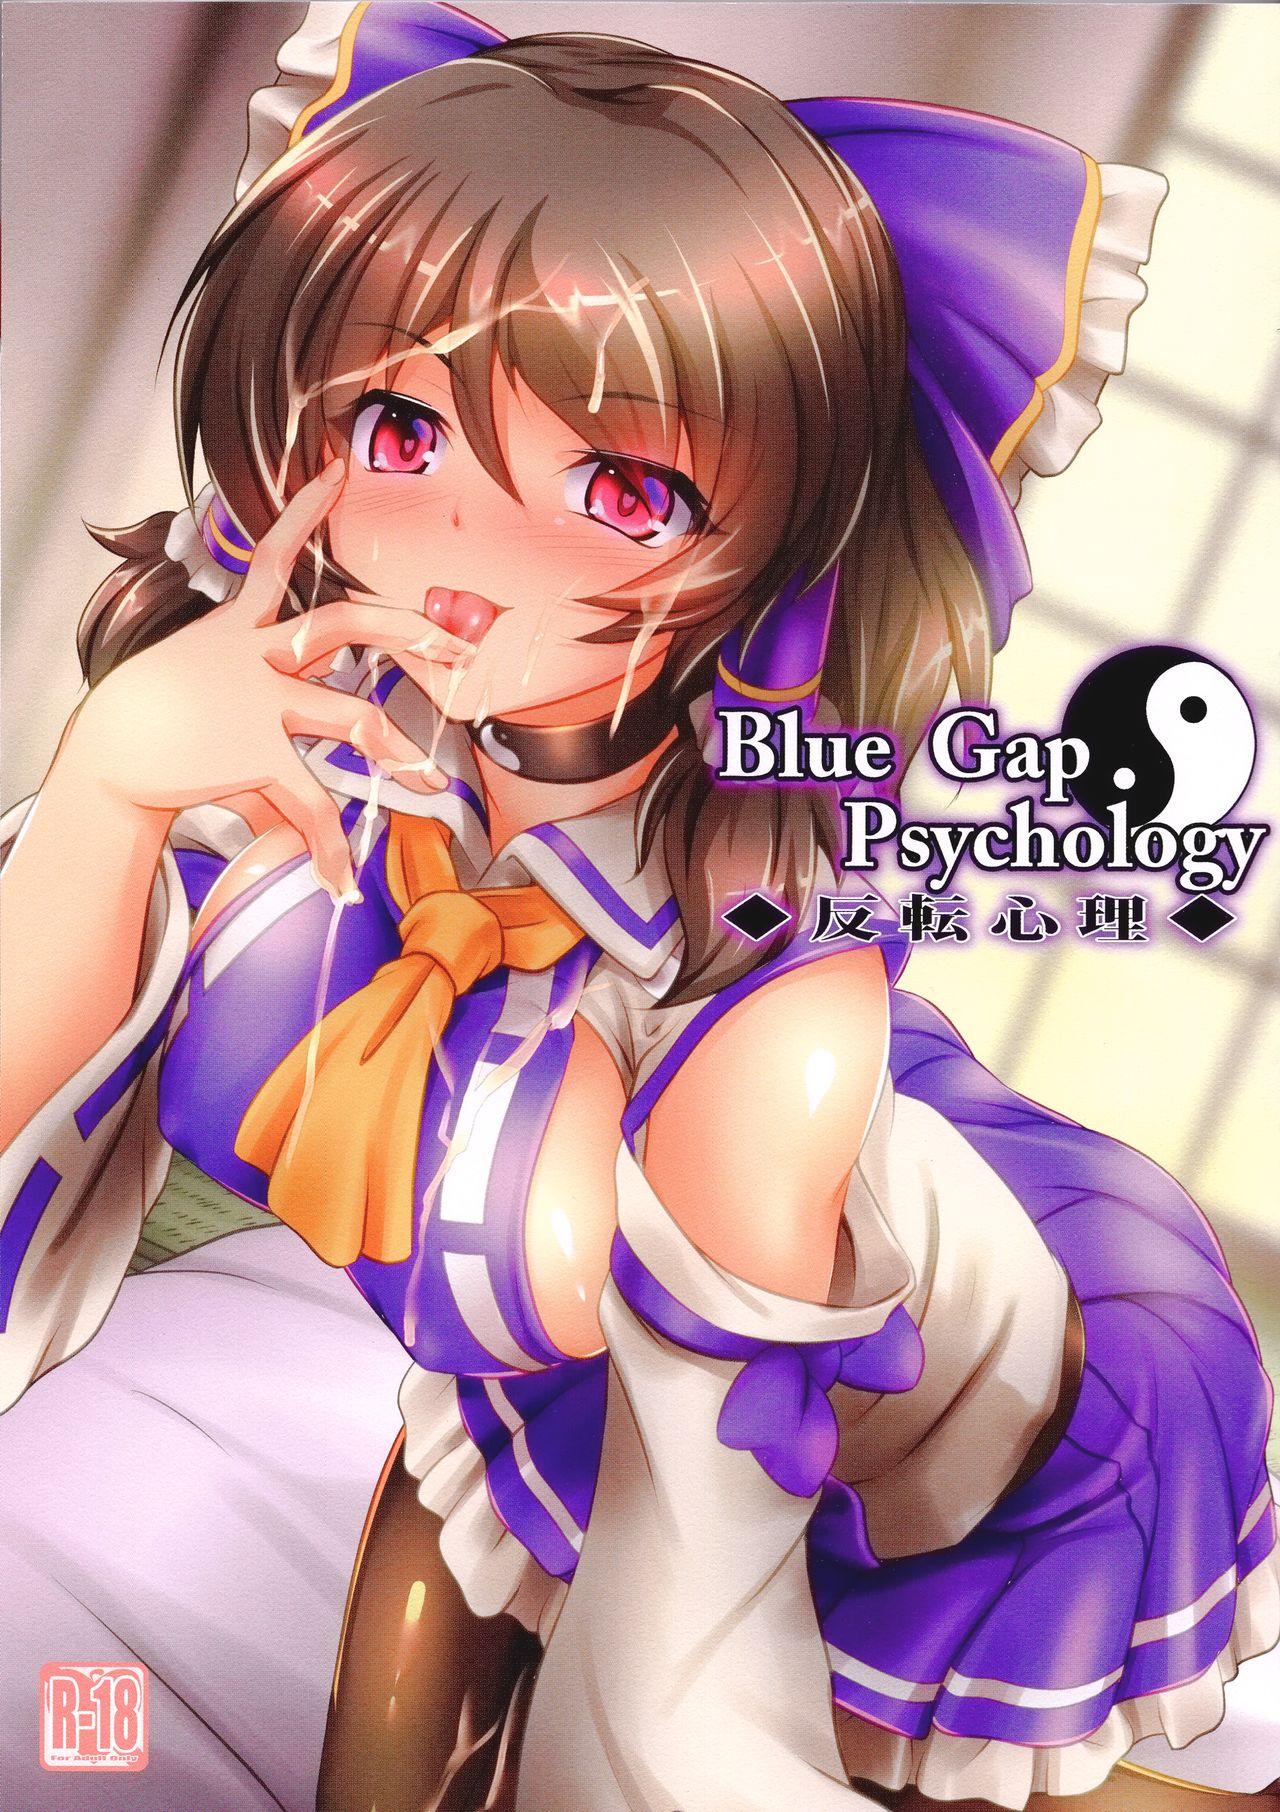 Atm Blue Gap Psychology - Touhou project Sexcams - Page 2